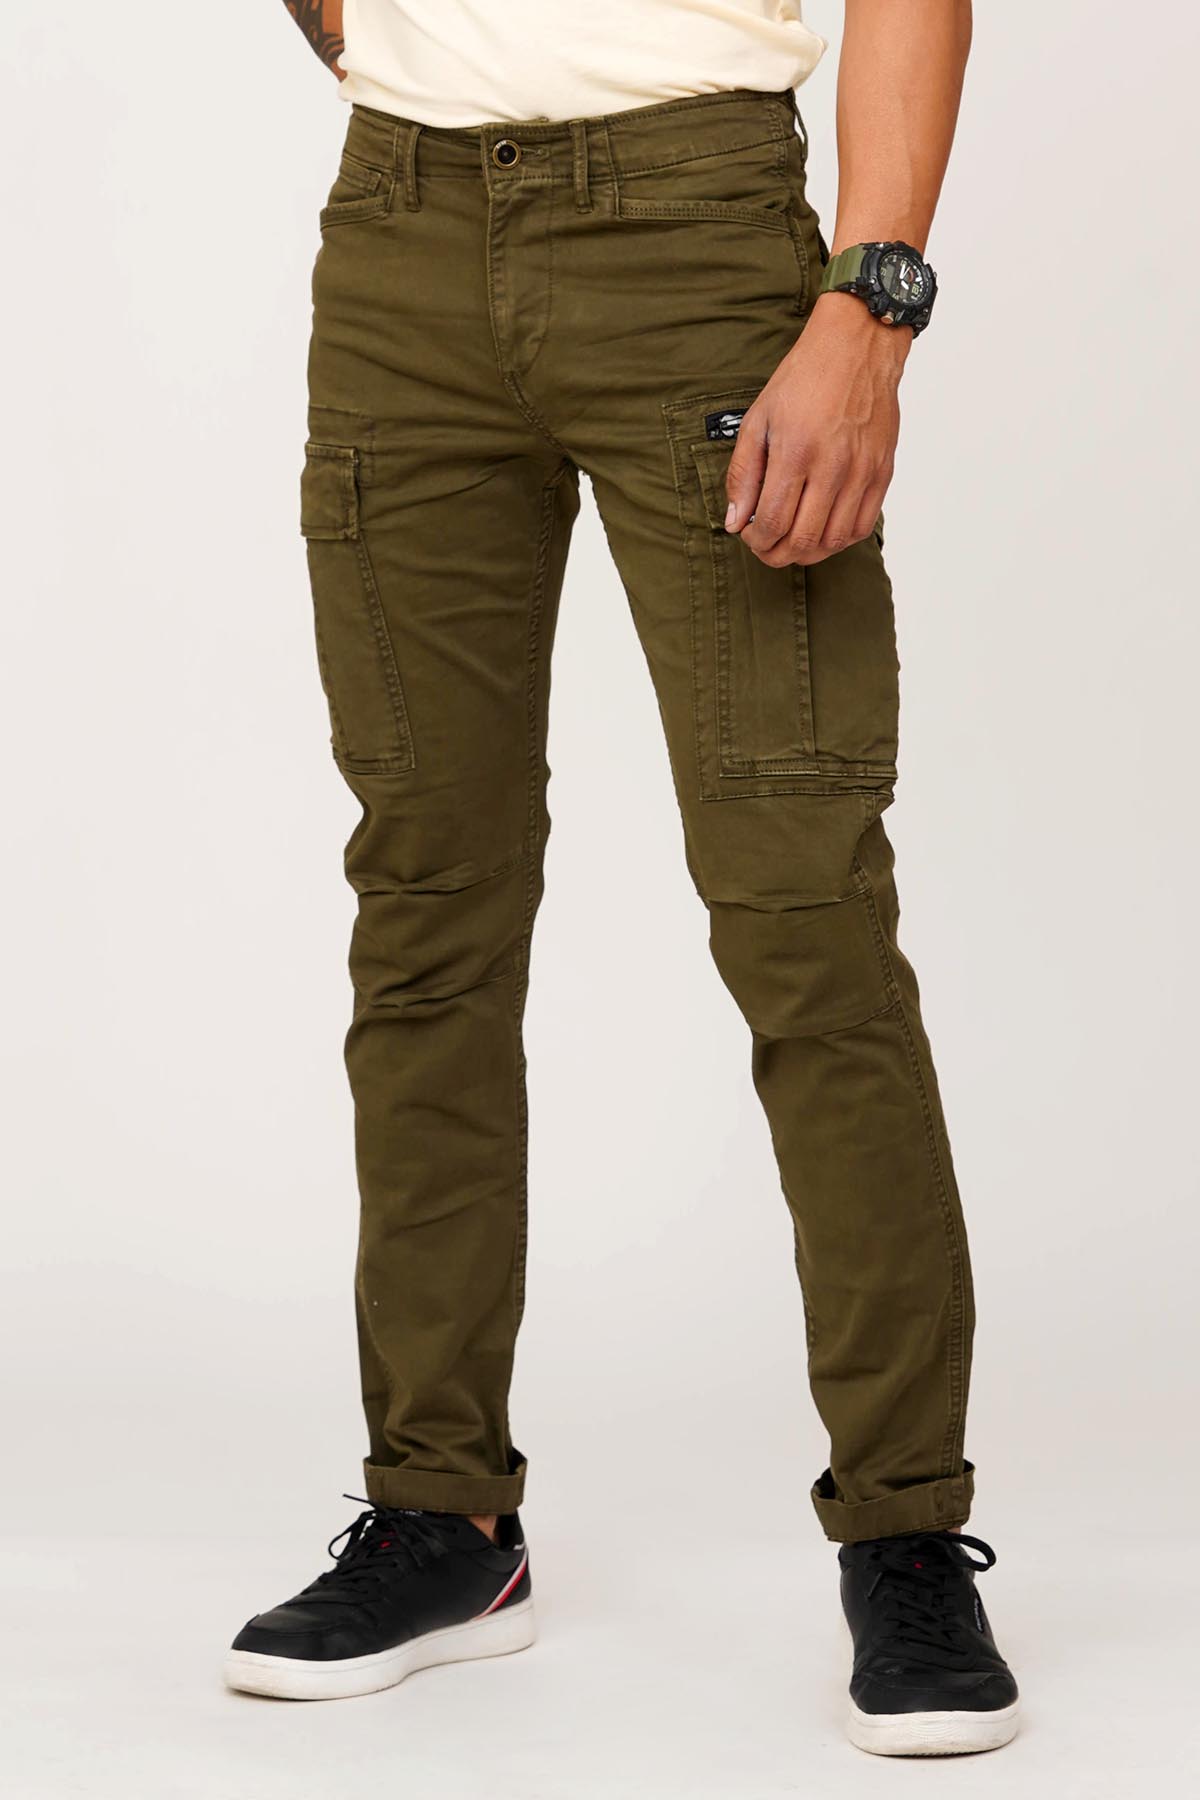 Buy Pepe Jeans Men Olive Green Holborne Regular Fit Cargo Trousers -  Trousers for Men 200598 | Myntra